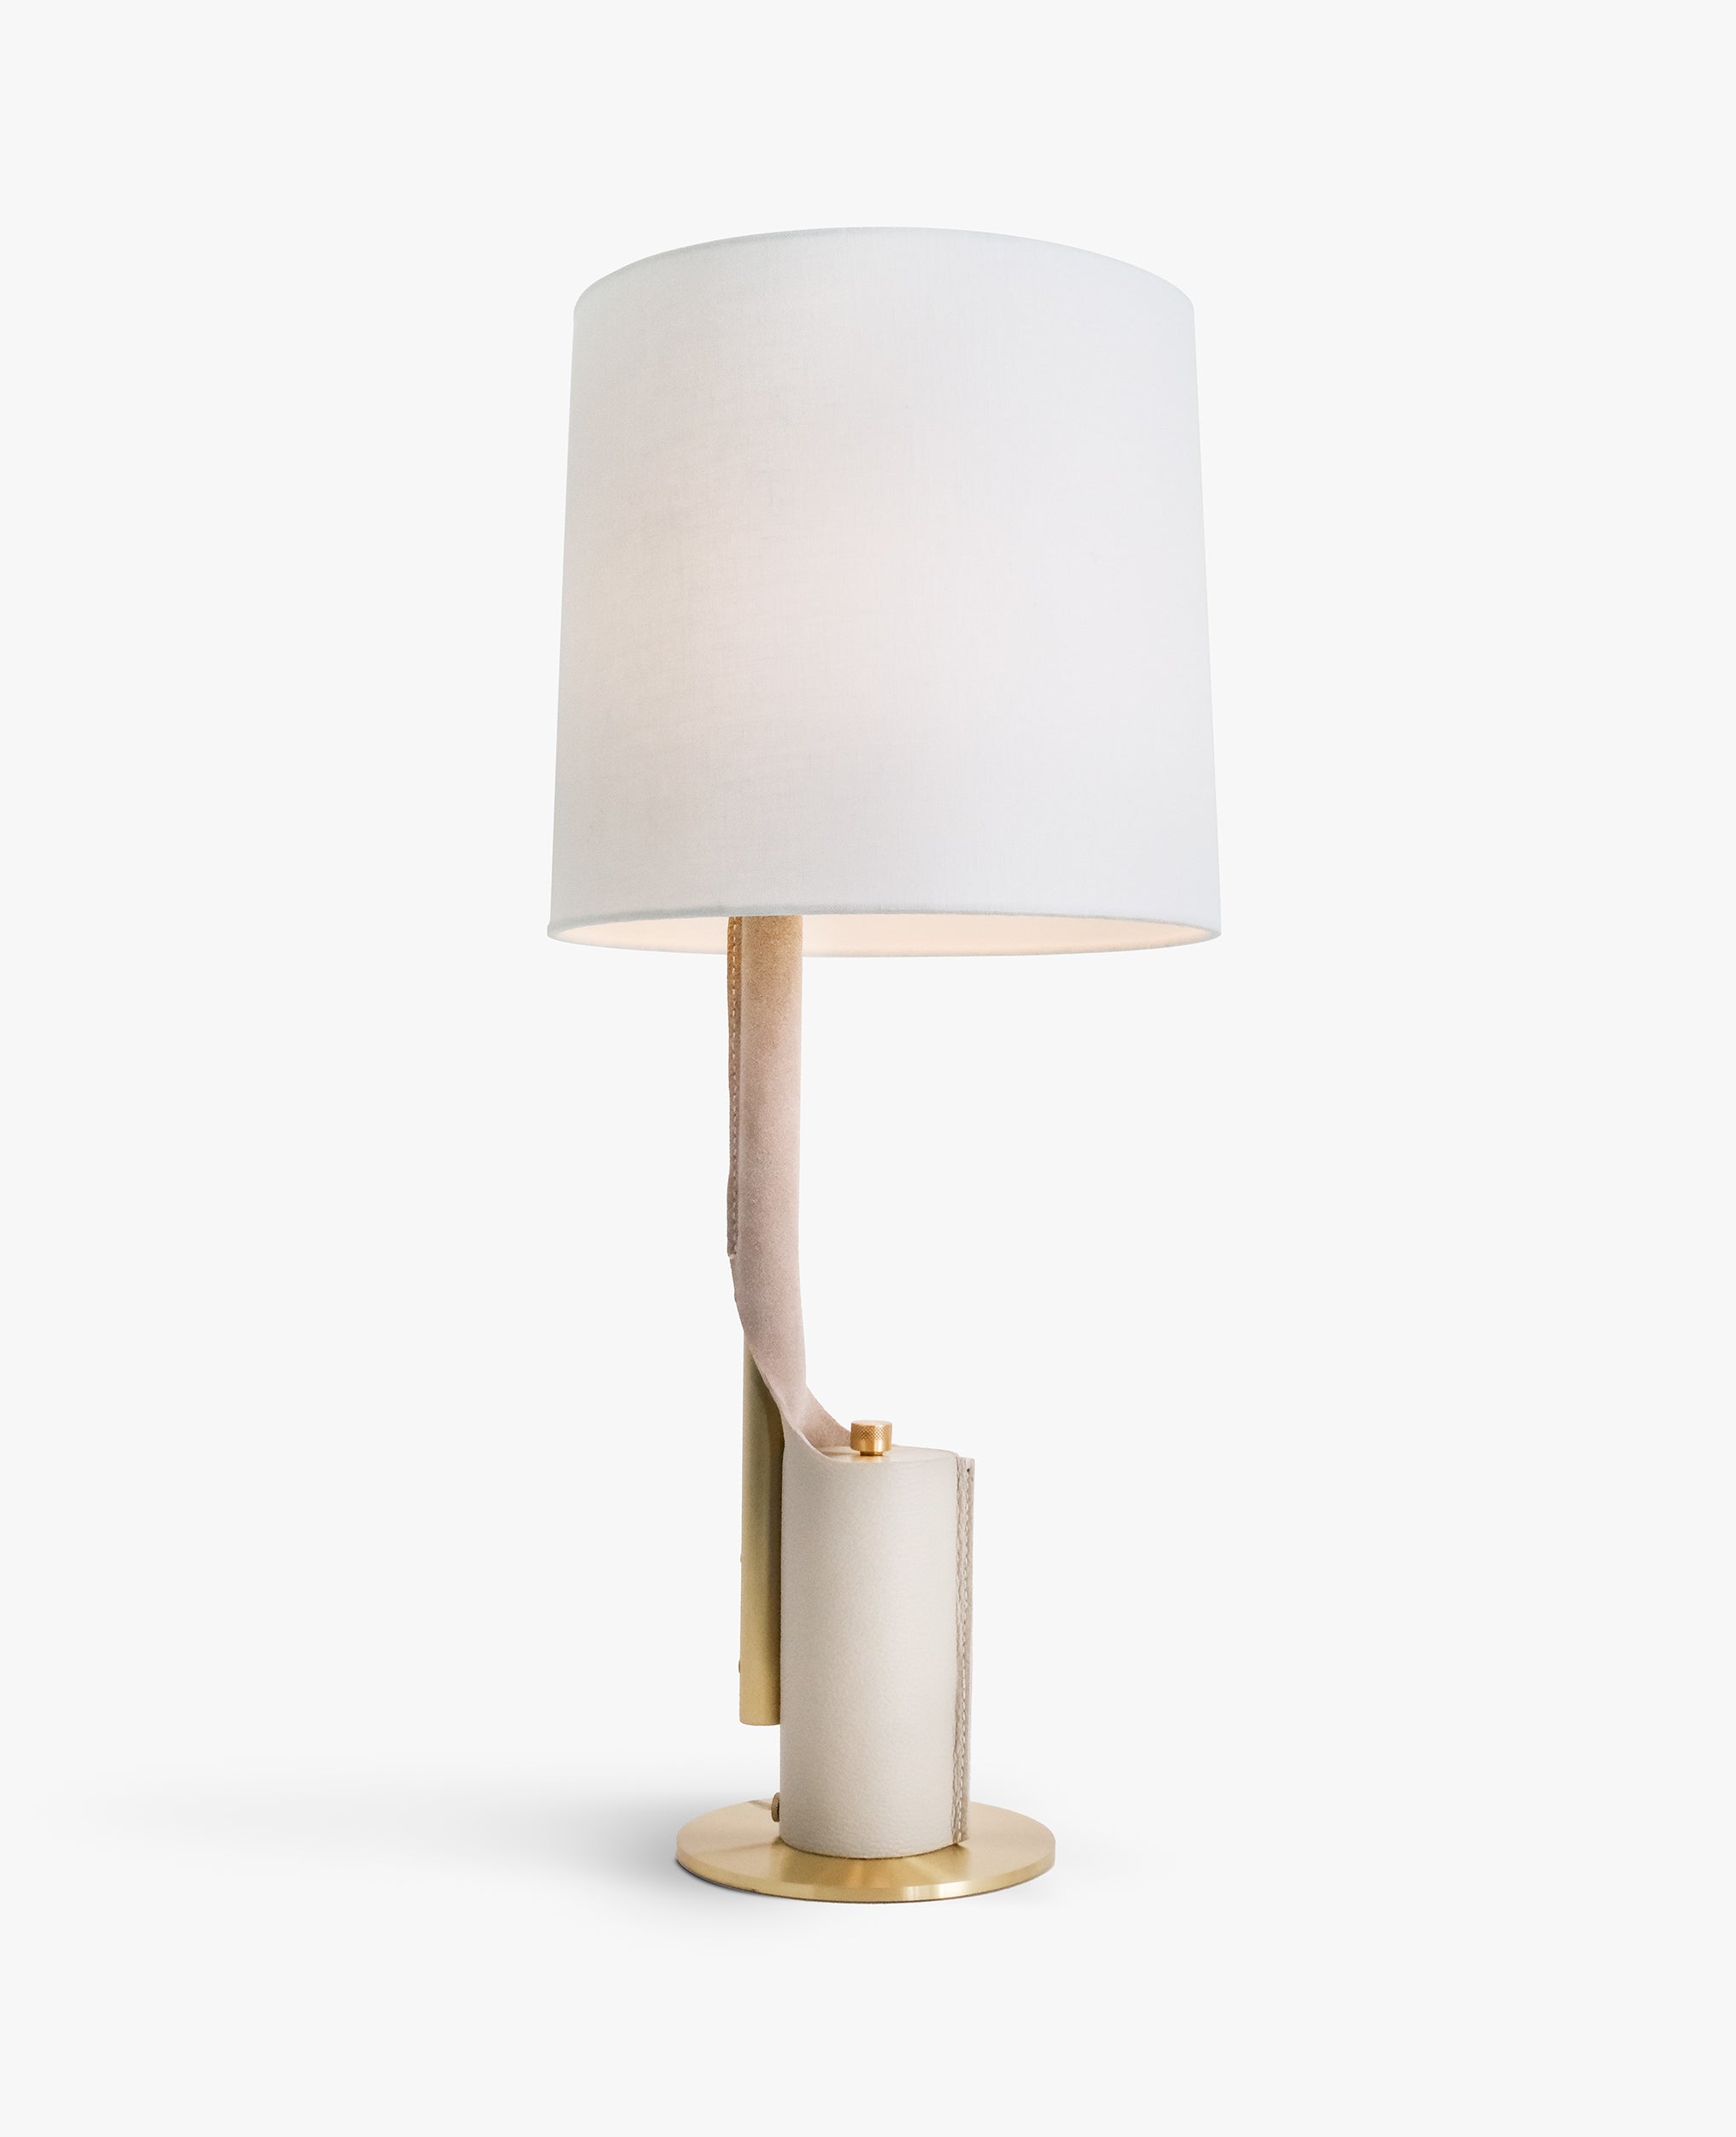 Brushed Brass w/ Cream Leather and White Linen Shade